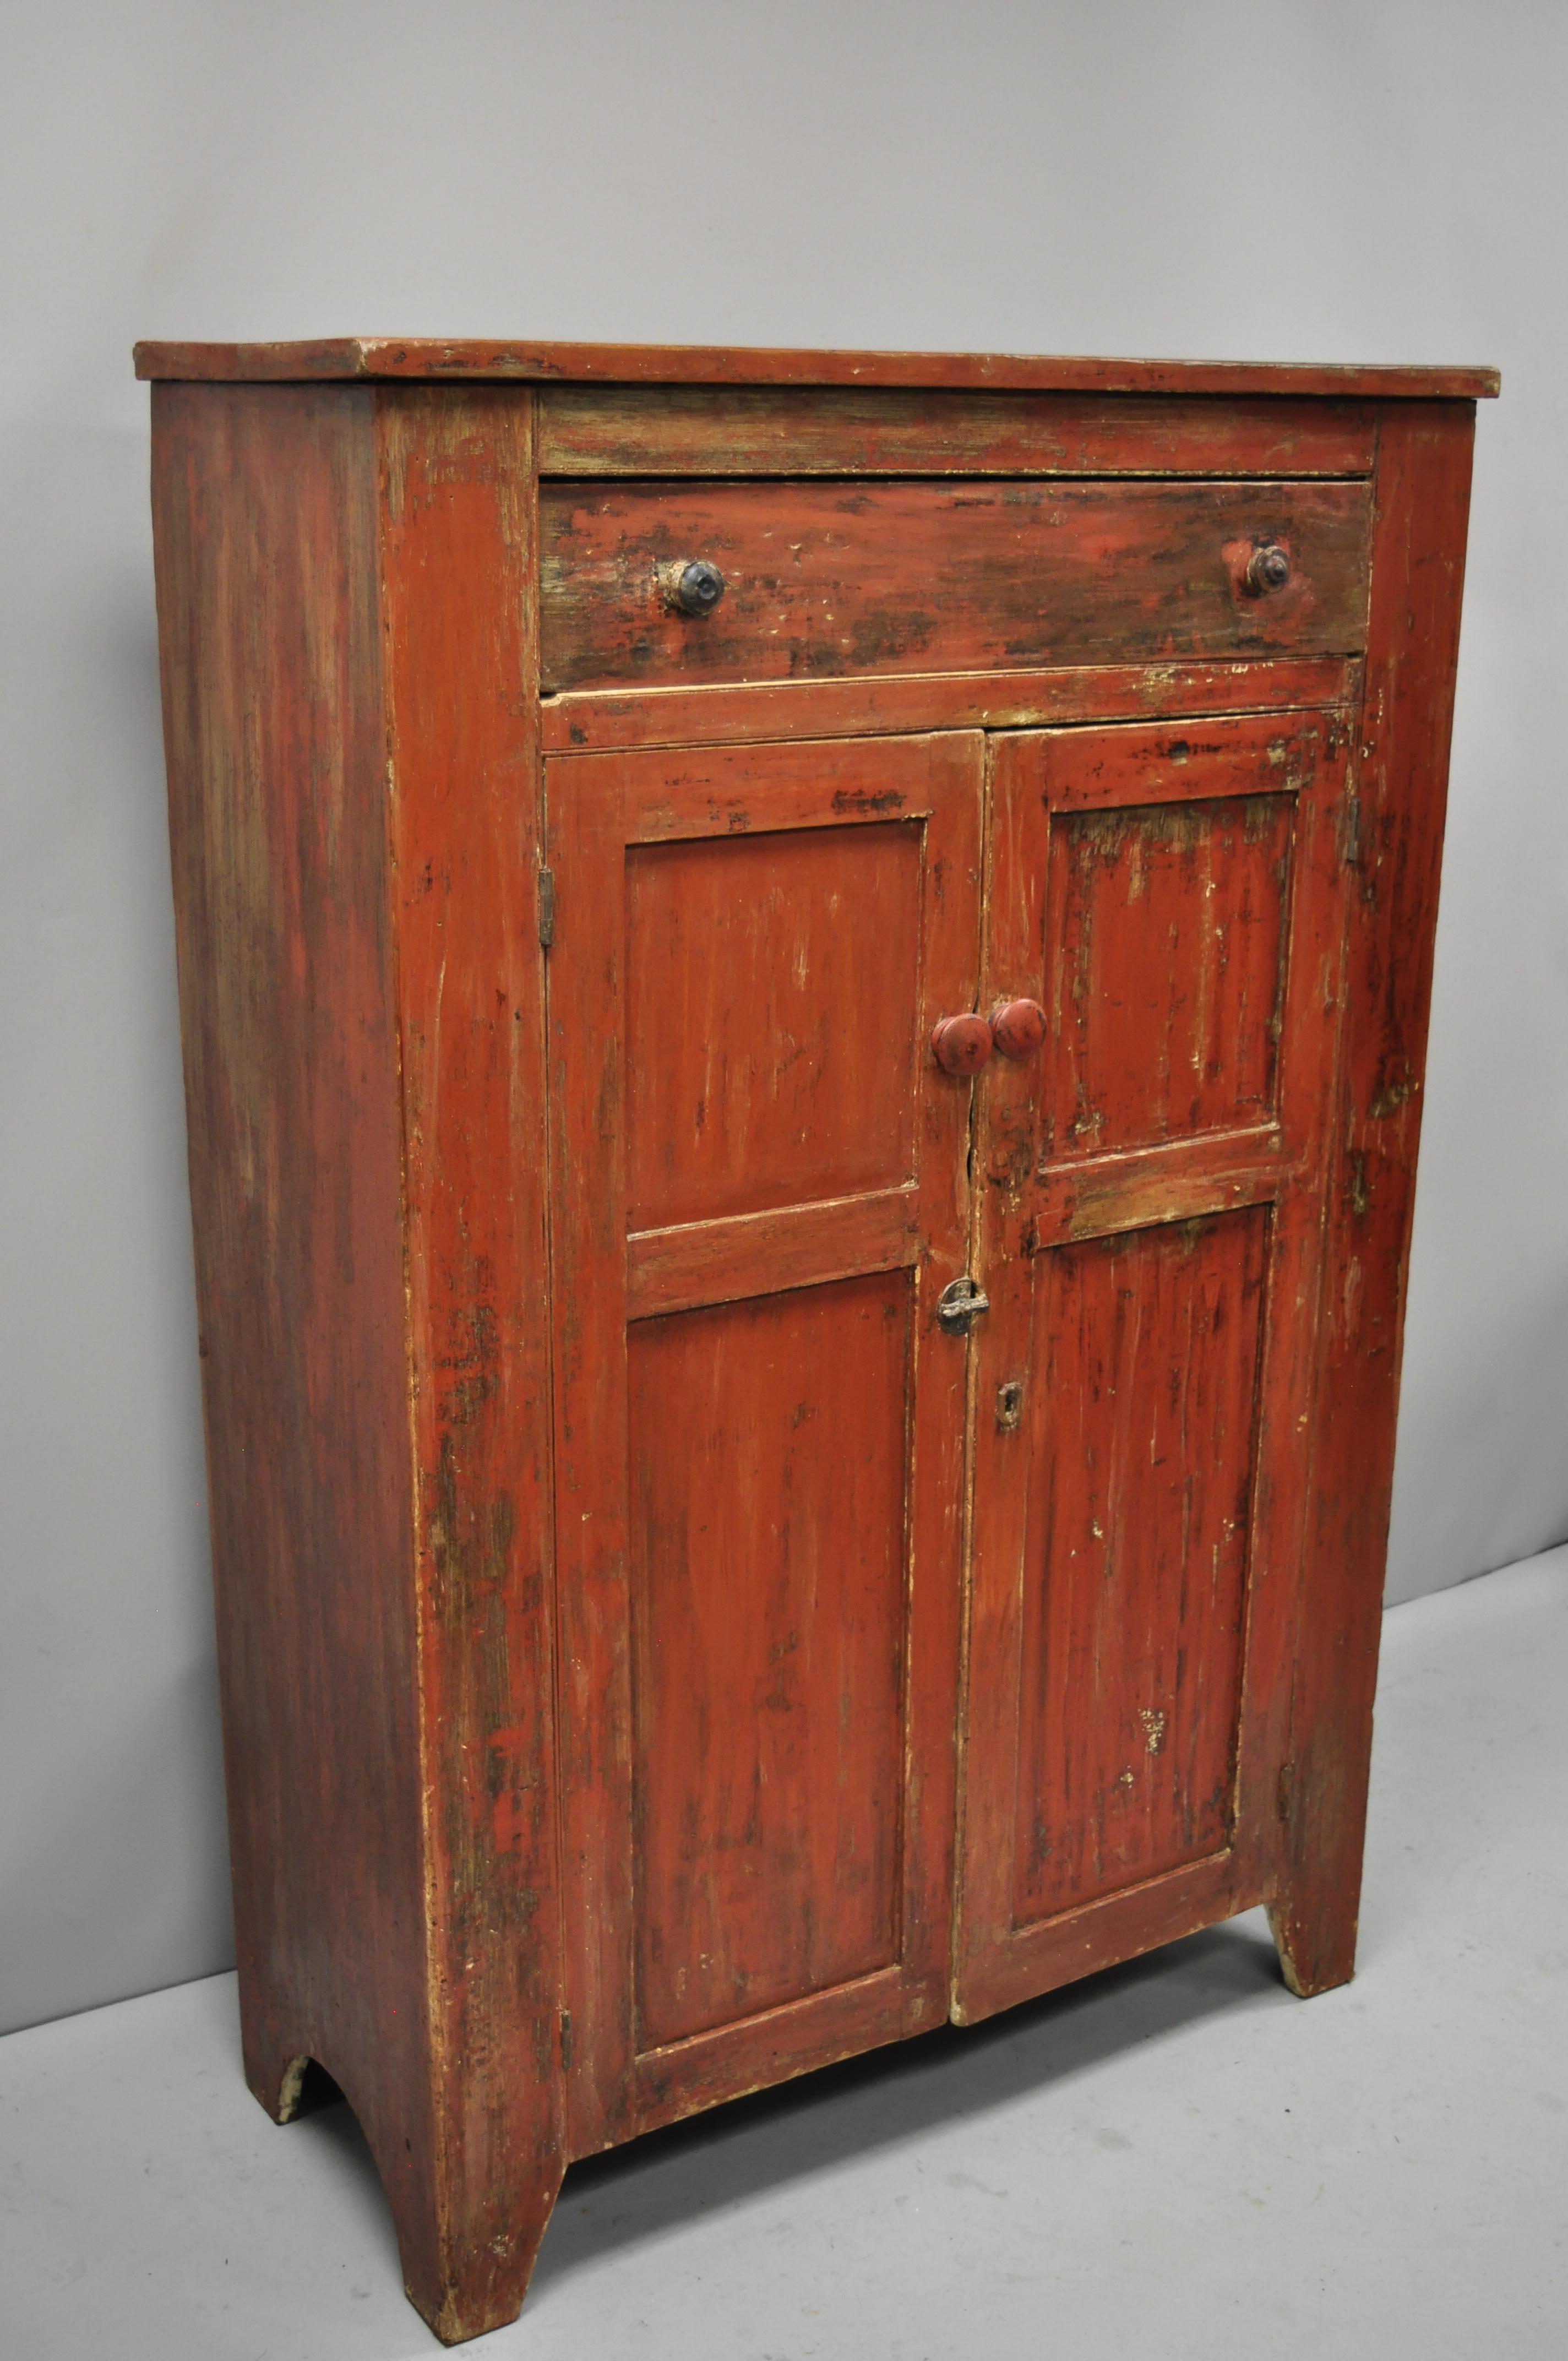 Antique 19th century American primitive red distress painted cupboard hutch pie safe cabinet. Item features remarkable distress painted red finish, wonderful patina, solid wood construction, 2 swing doors, 1 dovetailed drawer, 4 wooden shelves, very